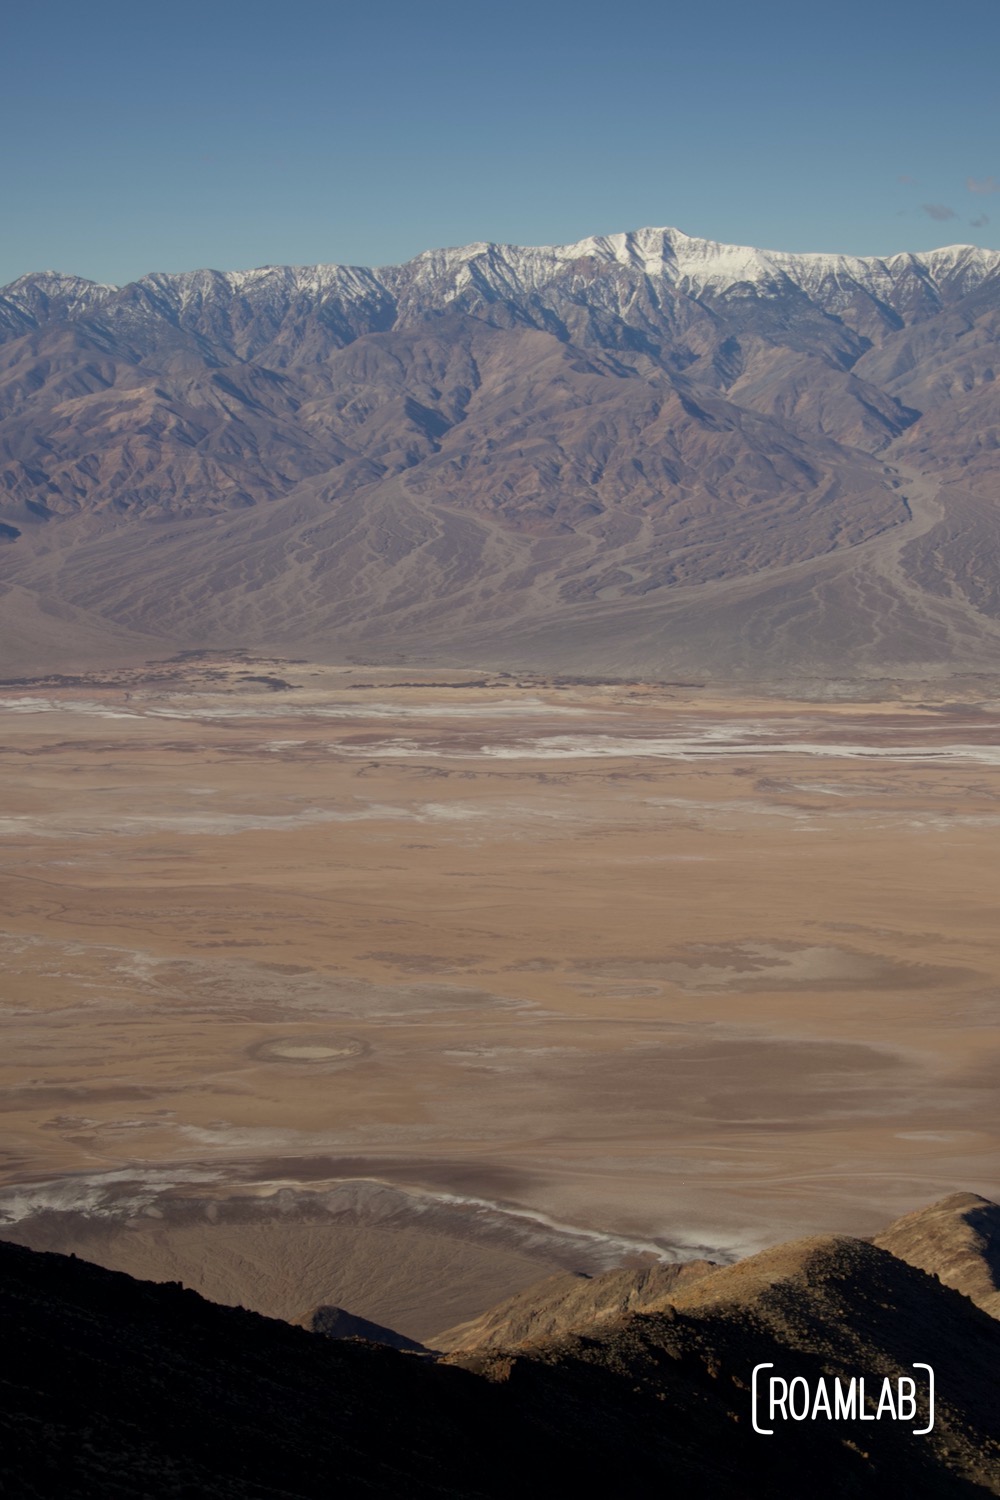 View of the Panamint Range across from Dante's View with Death Valley spread out below.